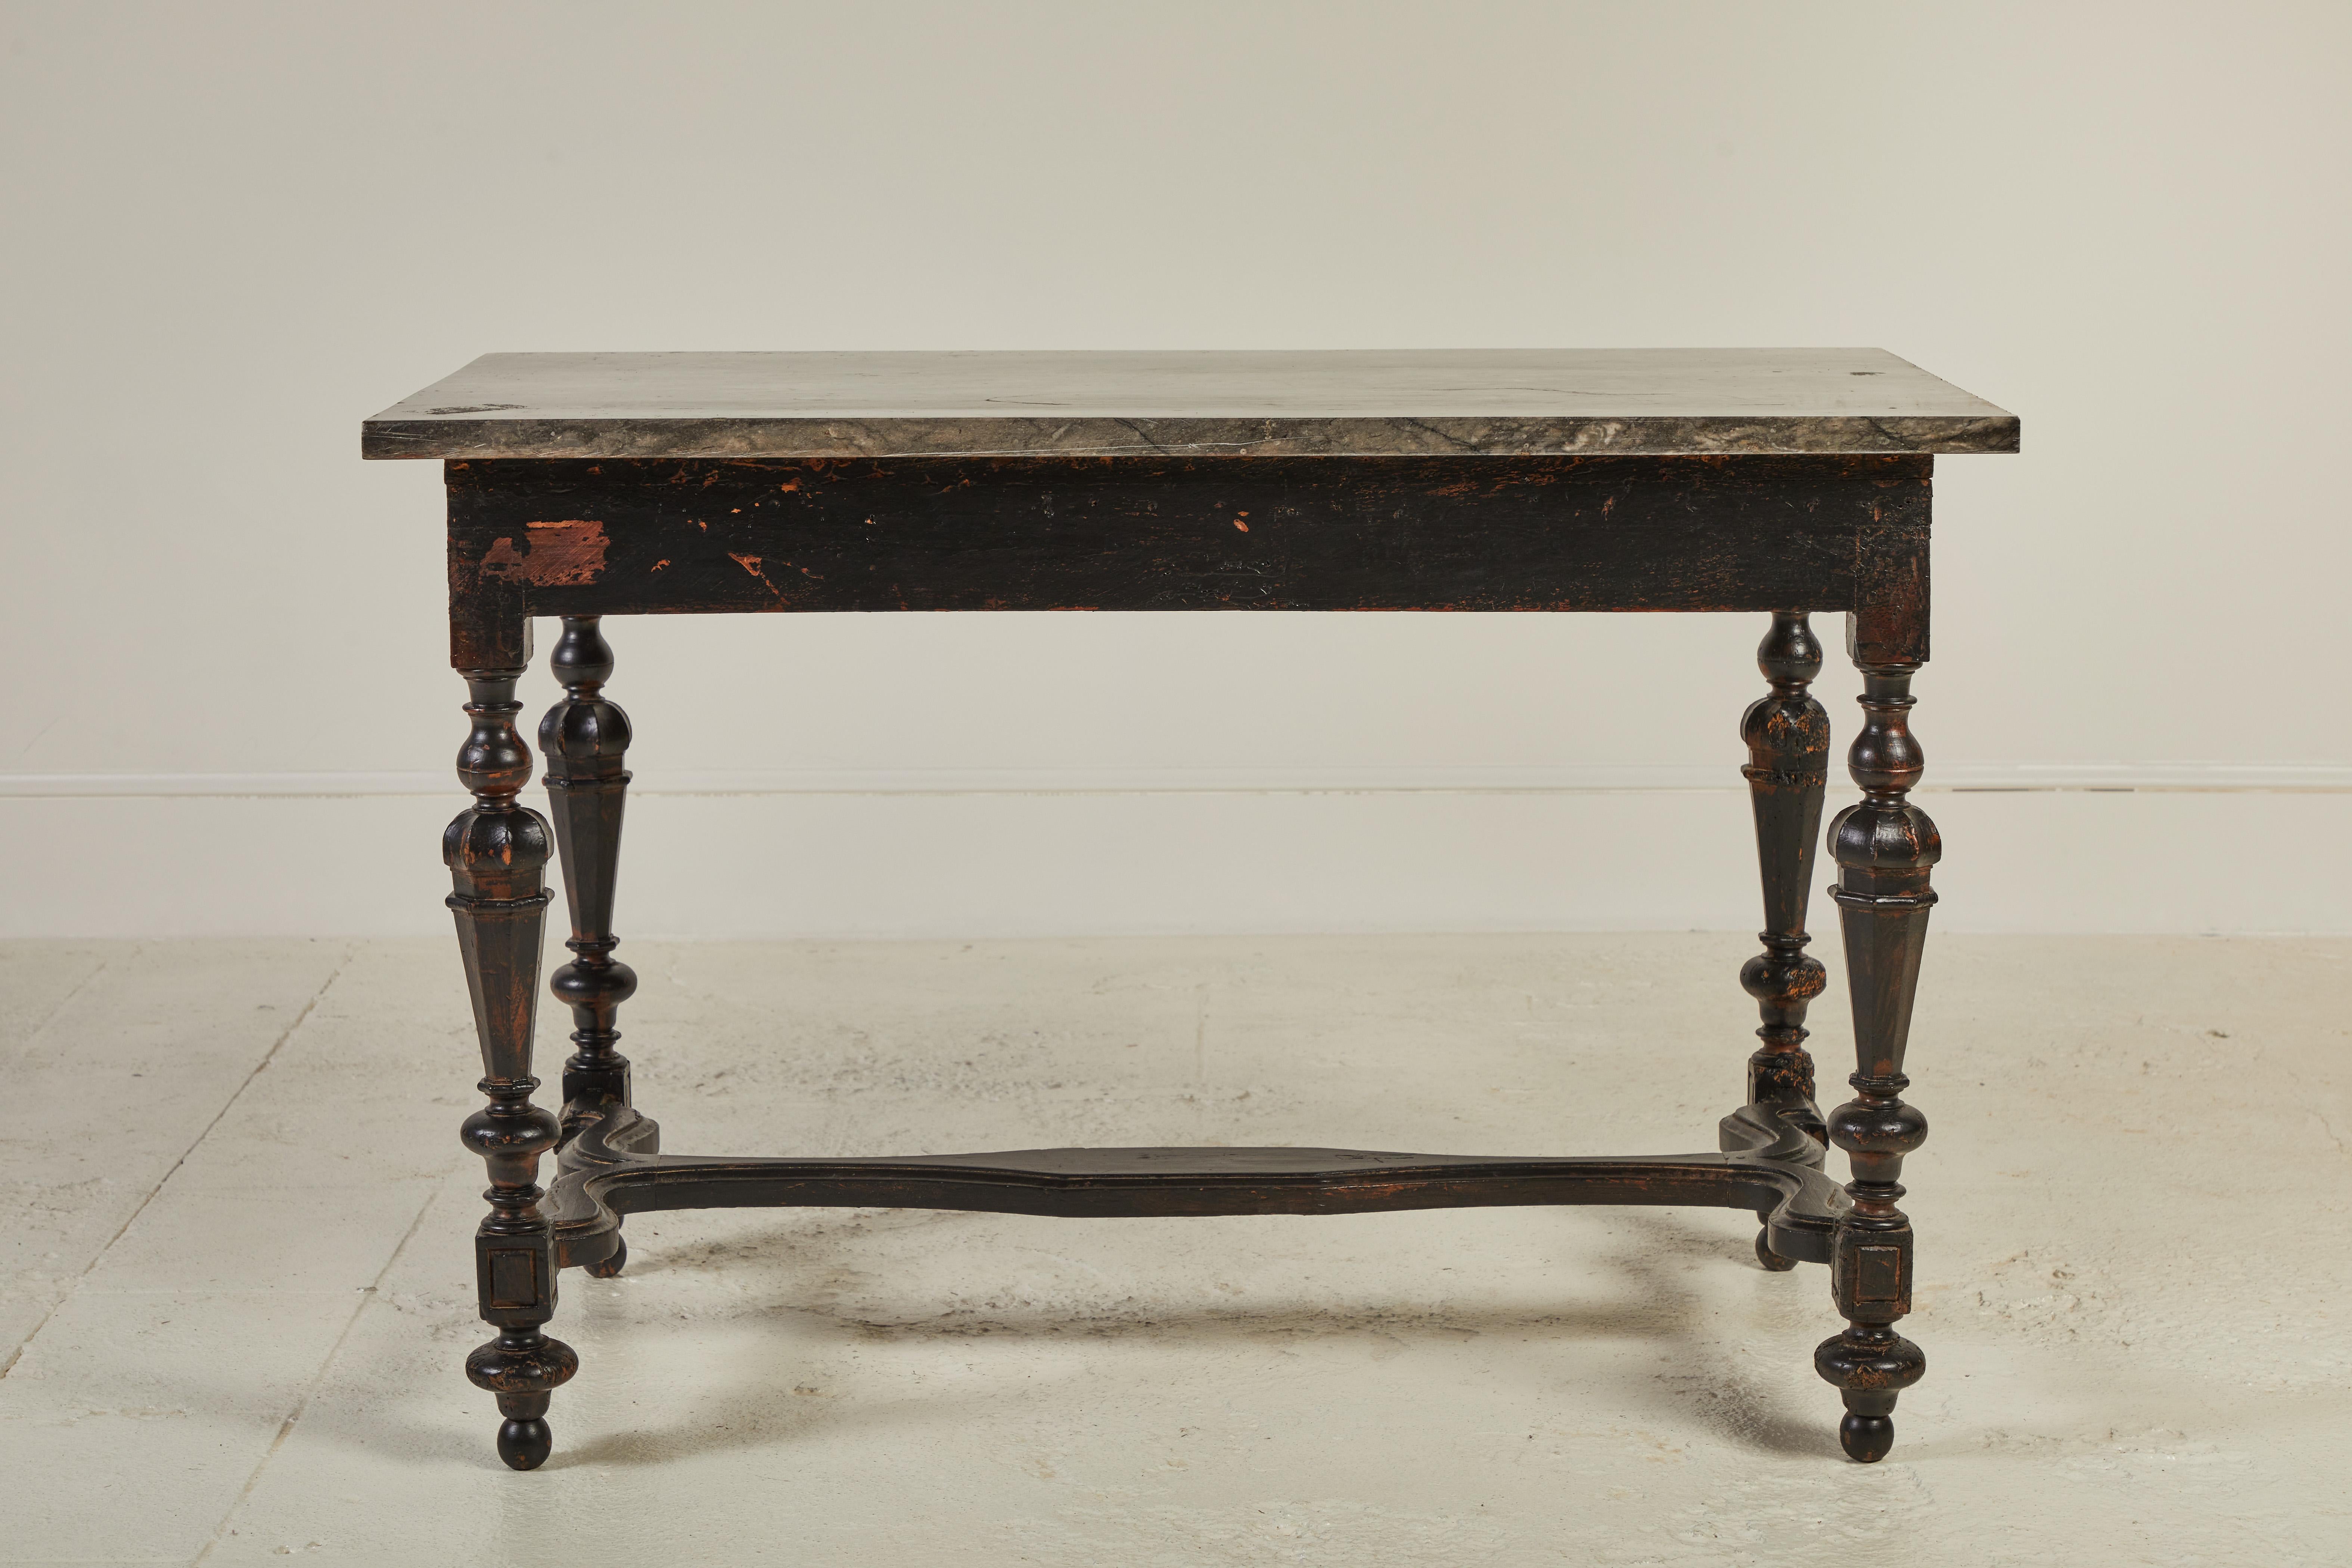 Elegant French black table with a detailed base with turned legs with an ornate stretcher base. A beautiful dark marble top finishes off the table.